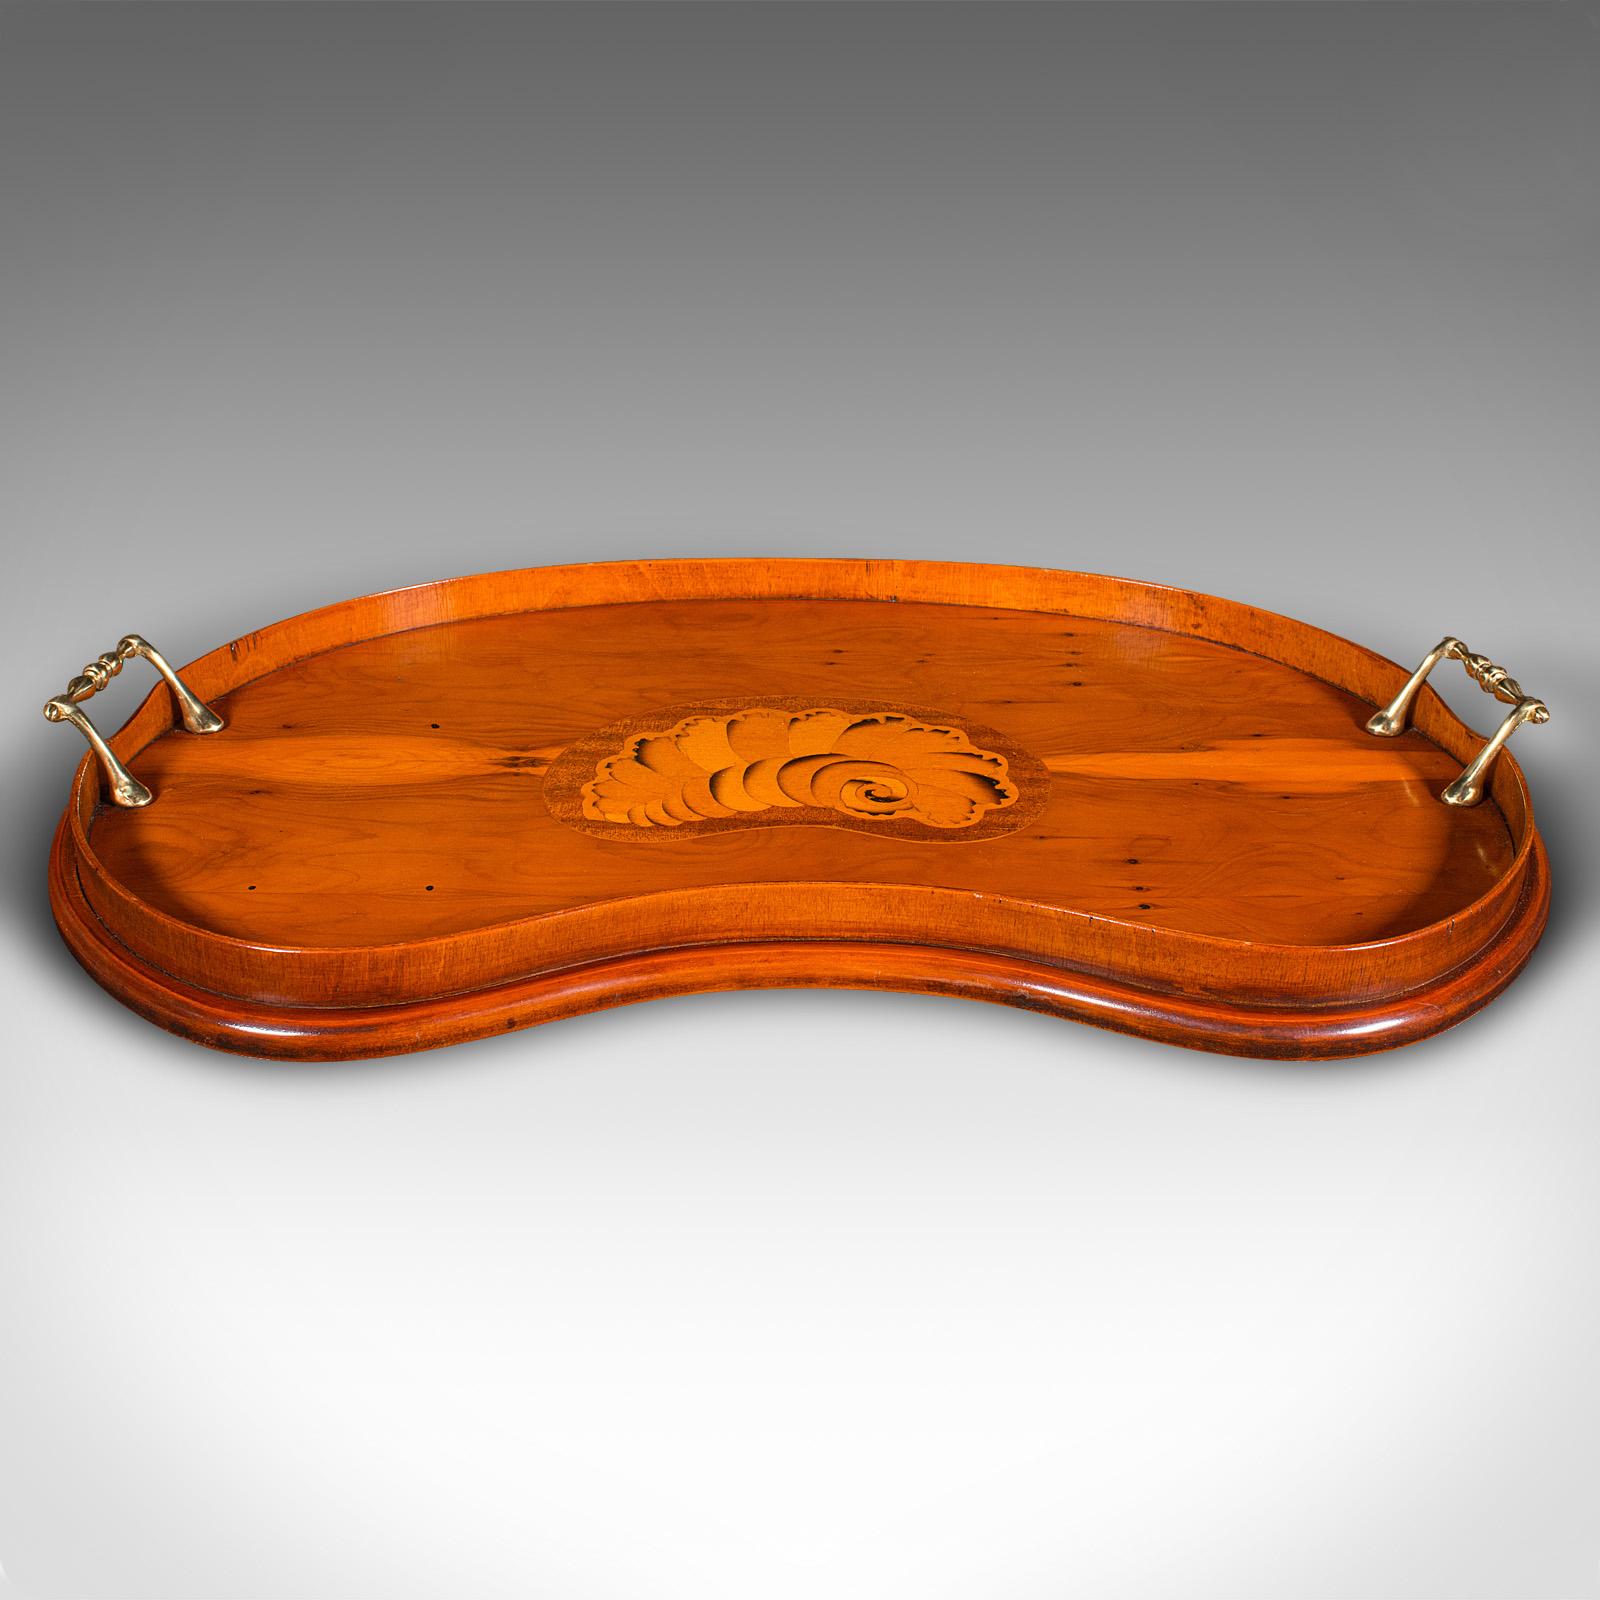 This is a vintage decorative afternoon tea tray. An English, yew and mahogany inlaid serving platter in Regency revival taste, dating to the late 20th century, circa 1980.

Delightful revival craftsmanship, ideal for social gatherings
Displays a